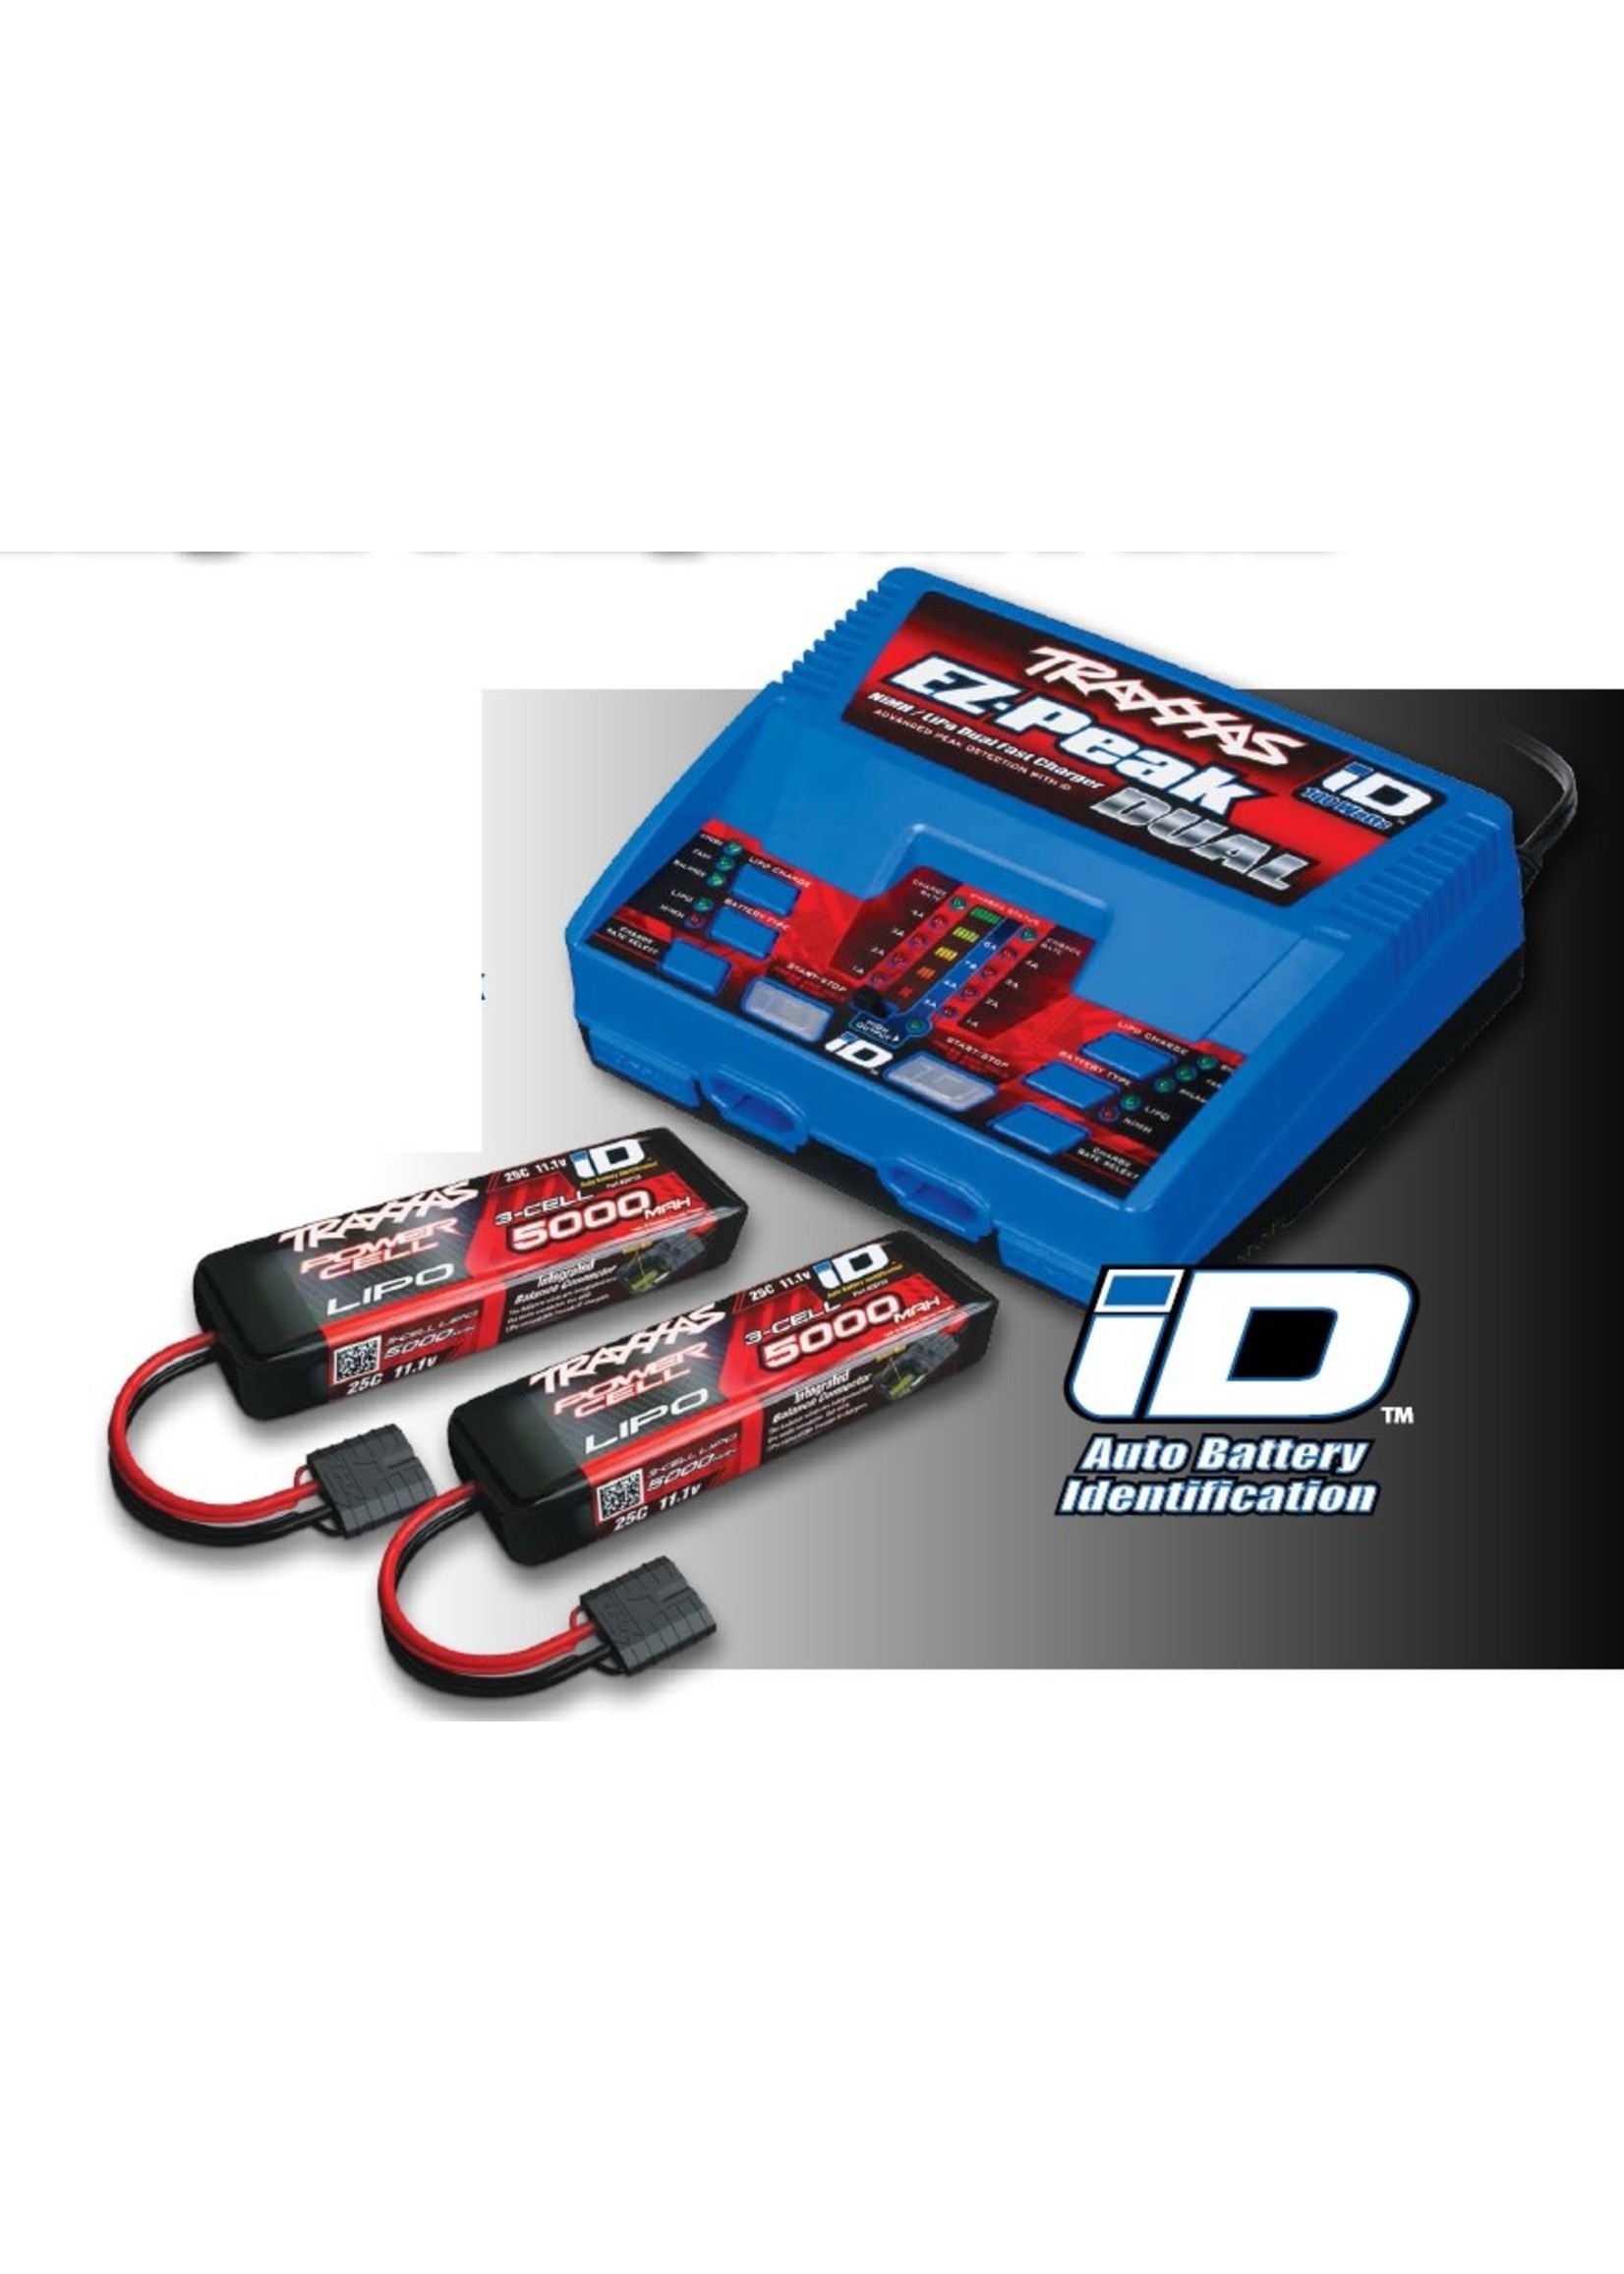 Traxxas 2992 EZ-Peak ID Charger & 2S 5800mAh LiPo Battery Completer